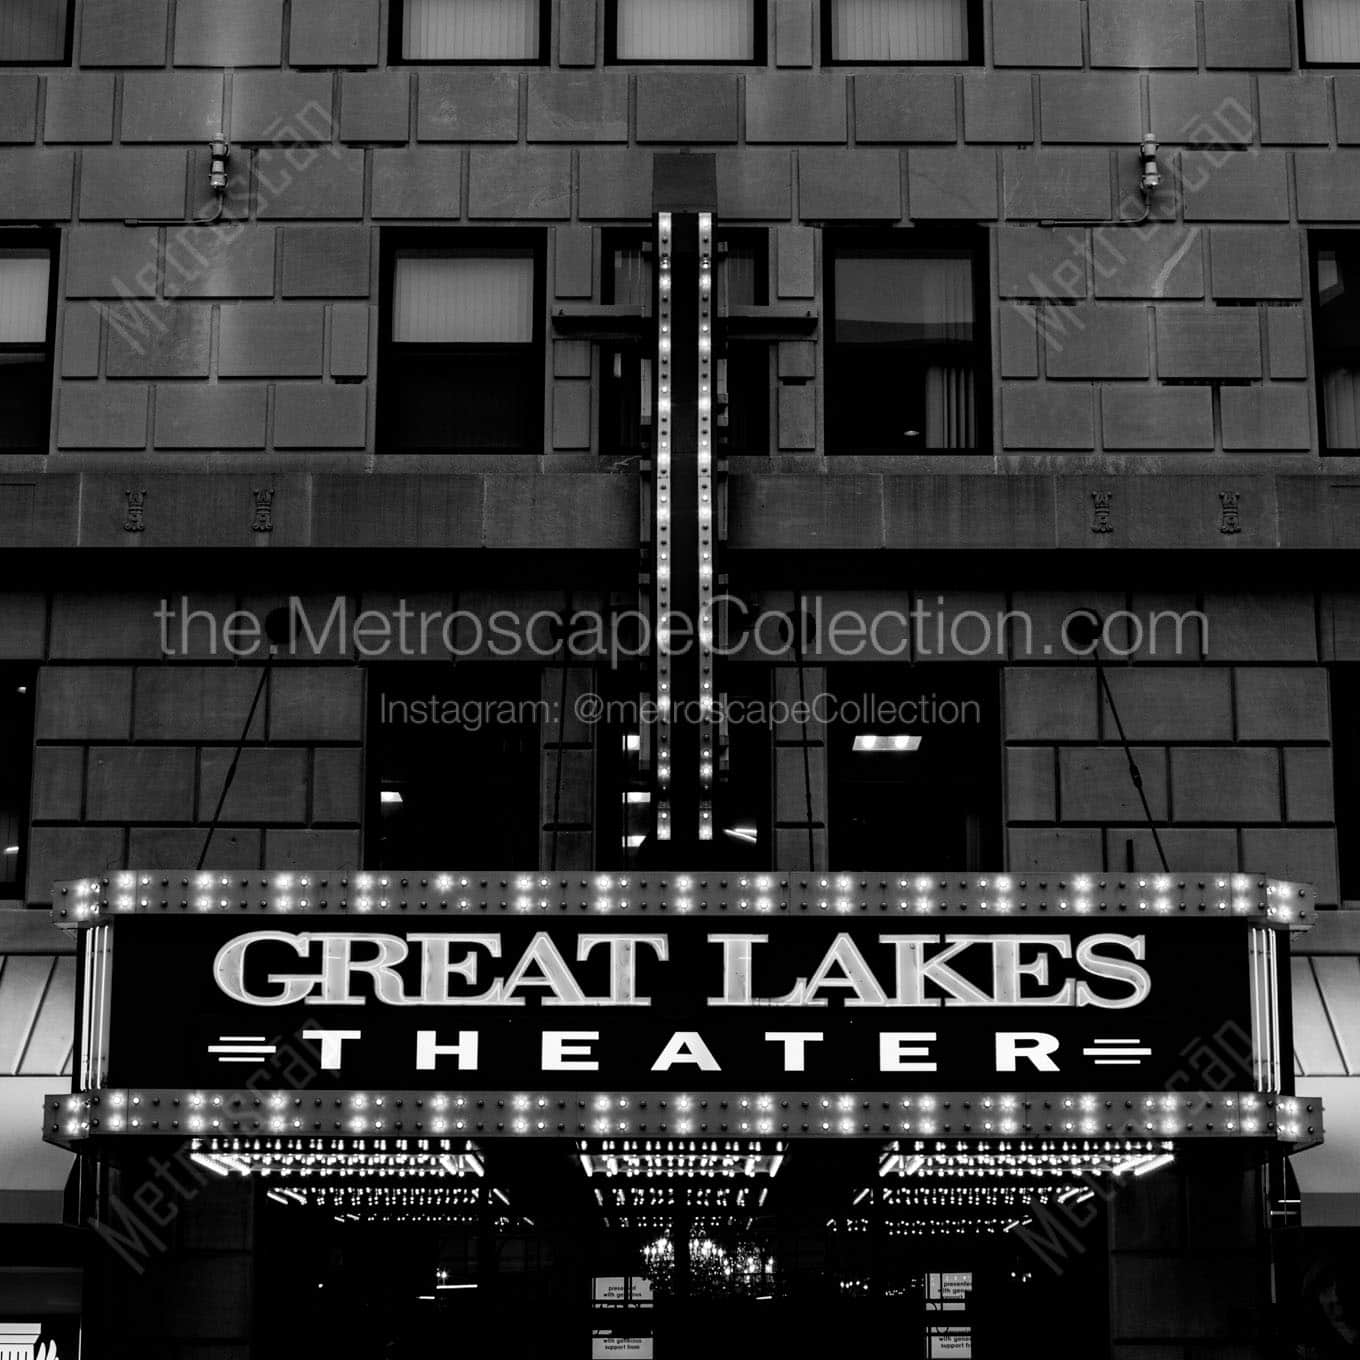 great lakes theater marquee Black & White Wall Art